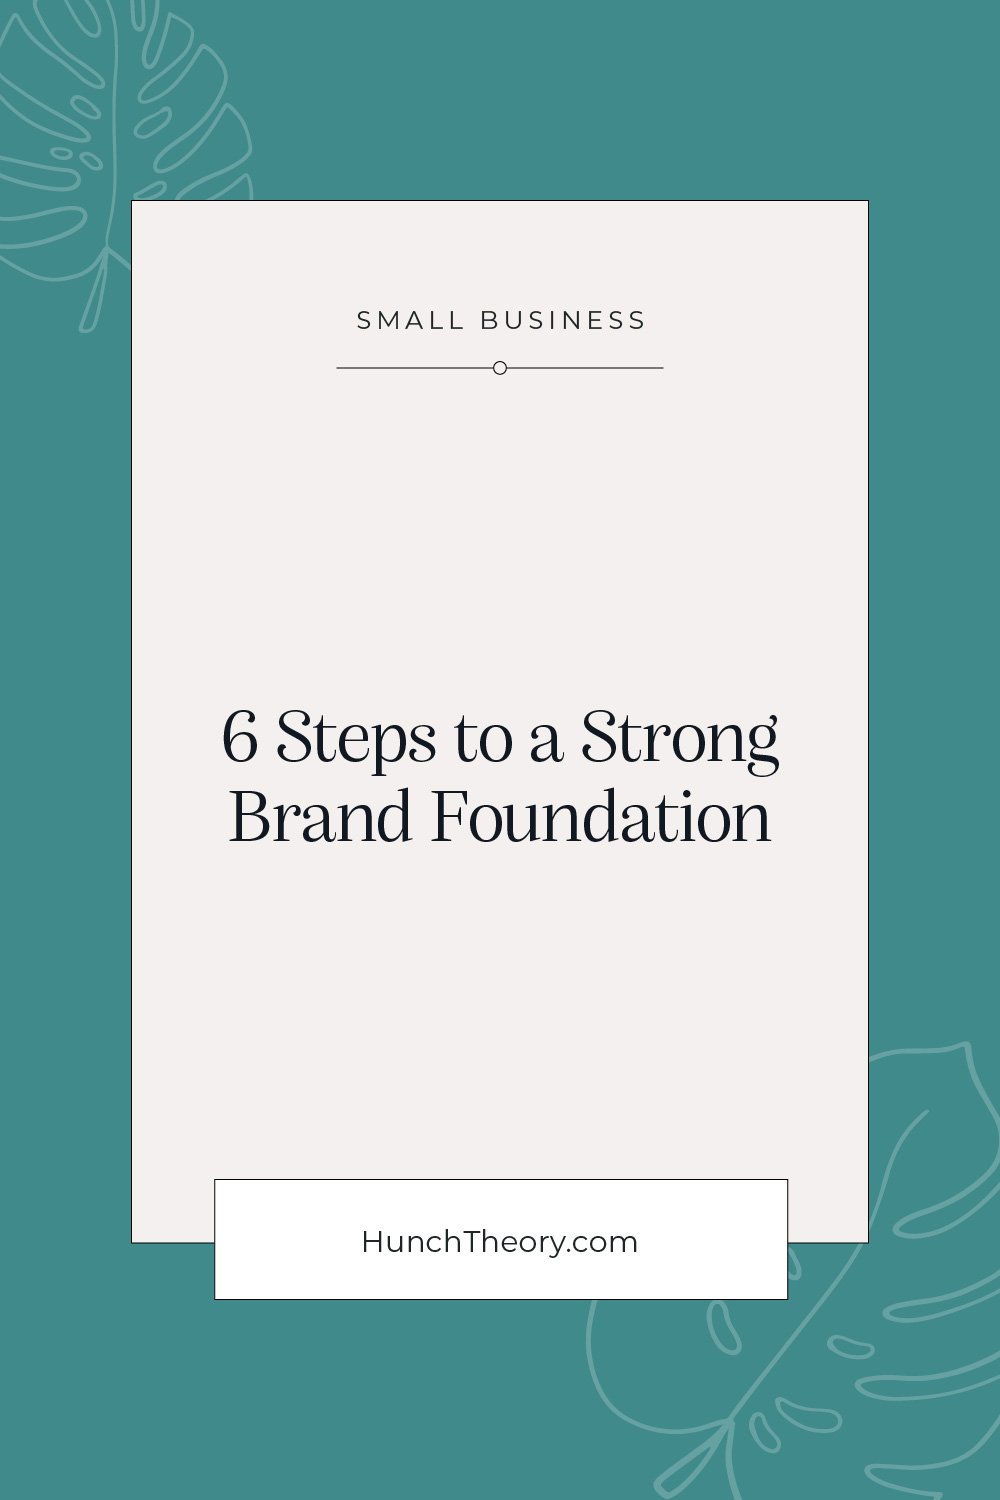 Brand Foundation - Set your business up for success